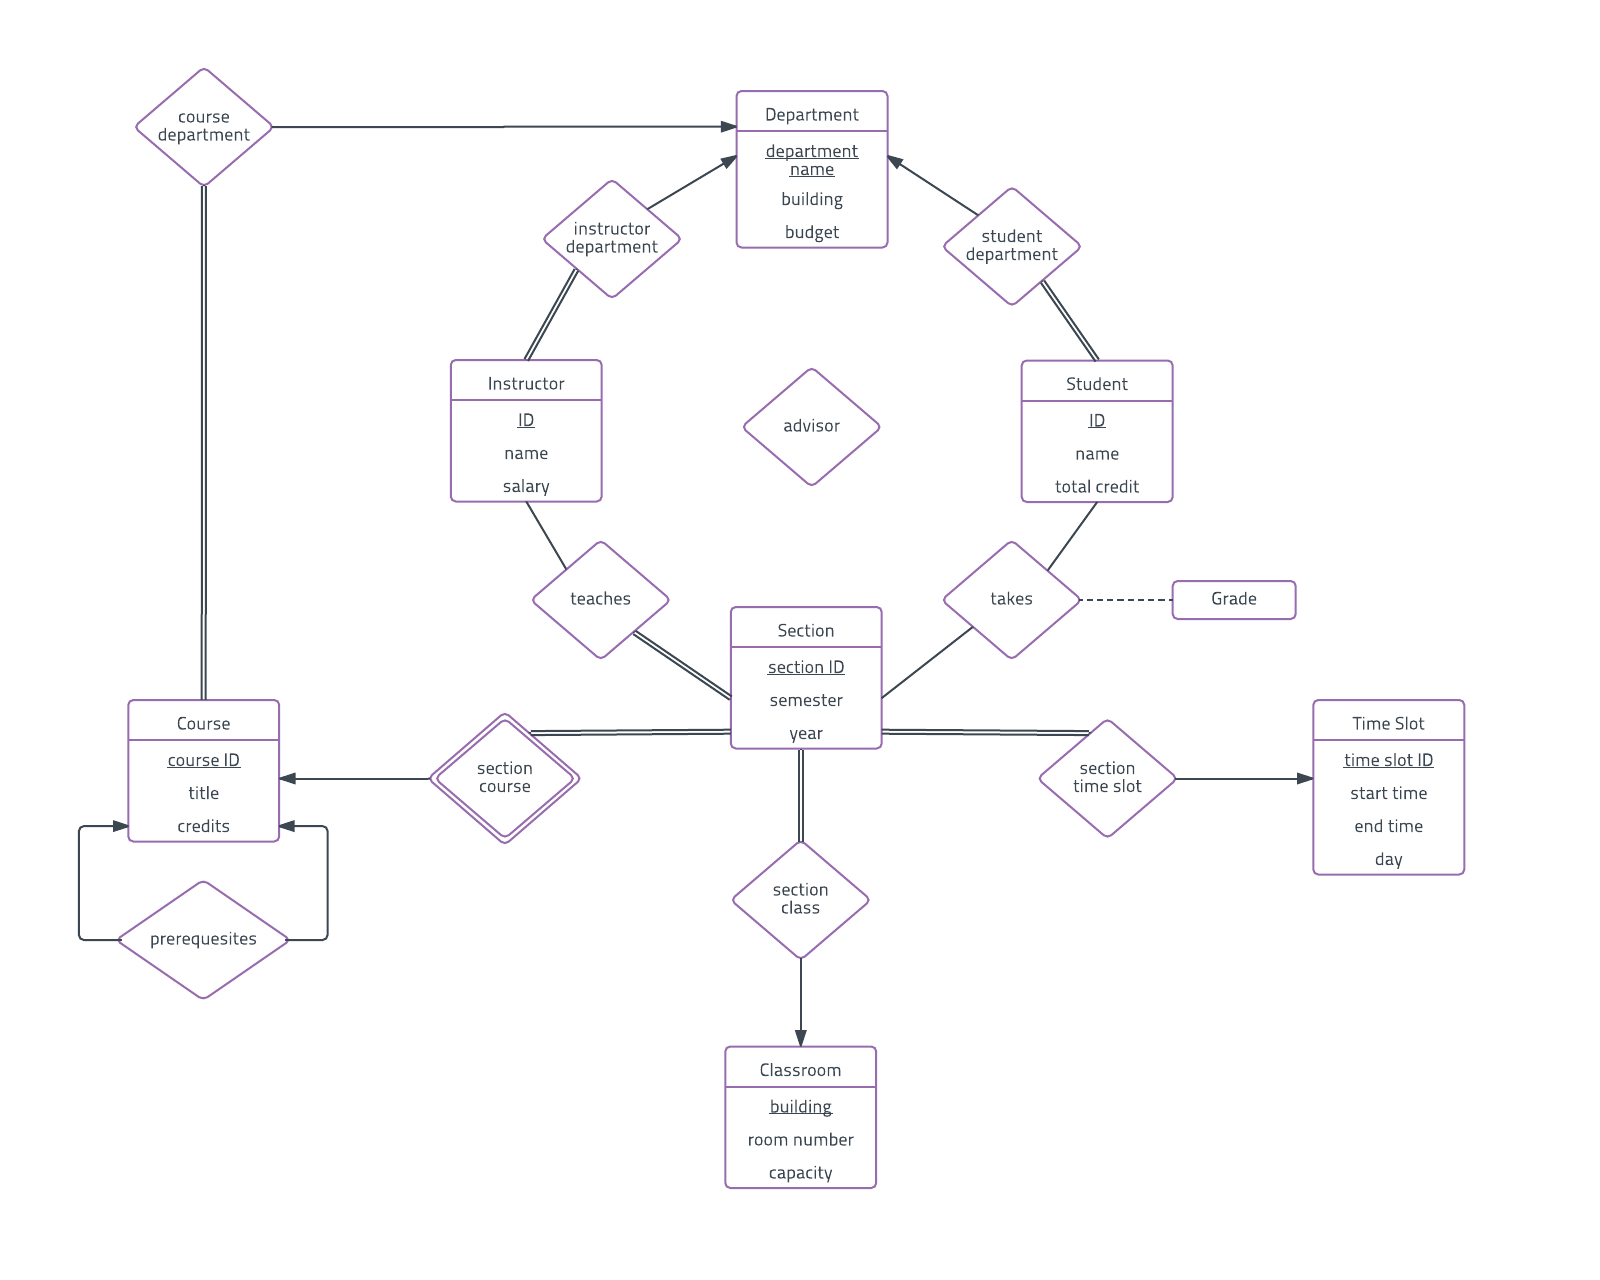 Er Diagram Examples And Templates | Lucidchart pertaining to Entity Relationship Diagram Examples With Description